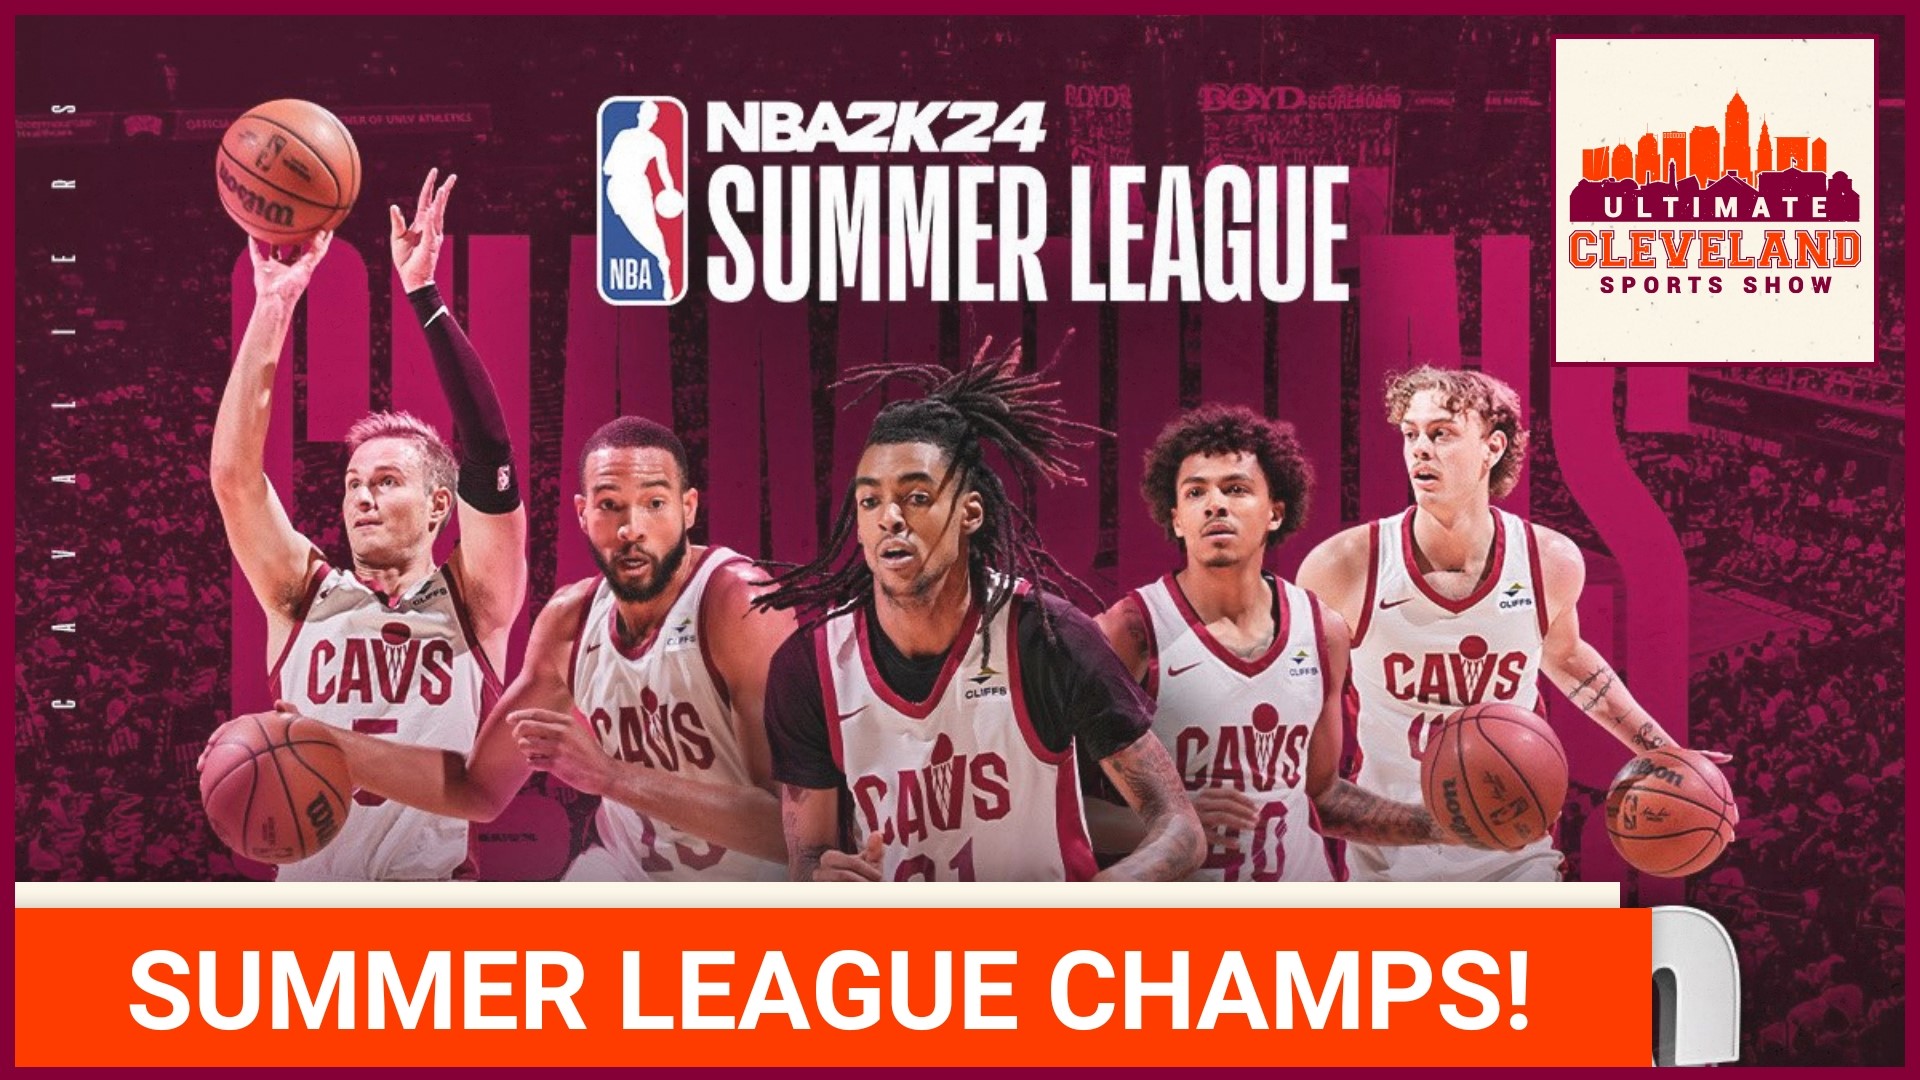 The Cleveland Cavaliers beat the Houston Rockets 99-78 to win their first-ever Summer League Championship